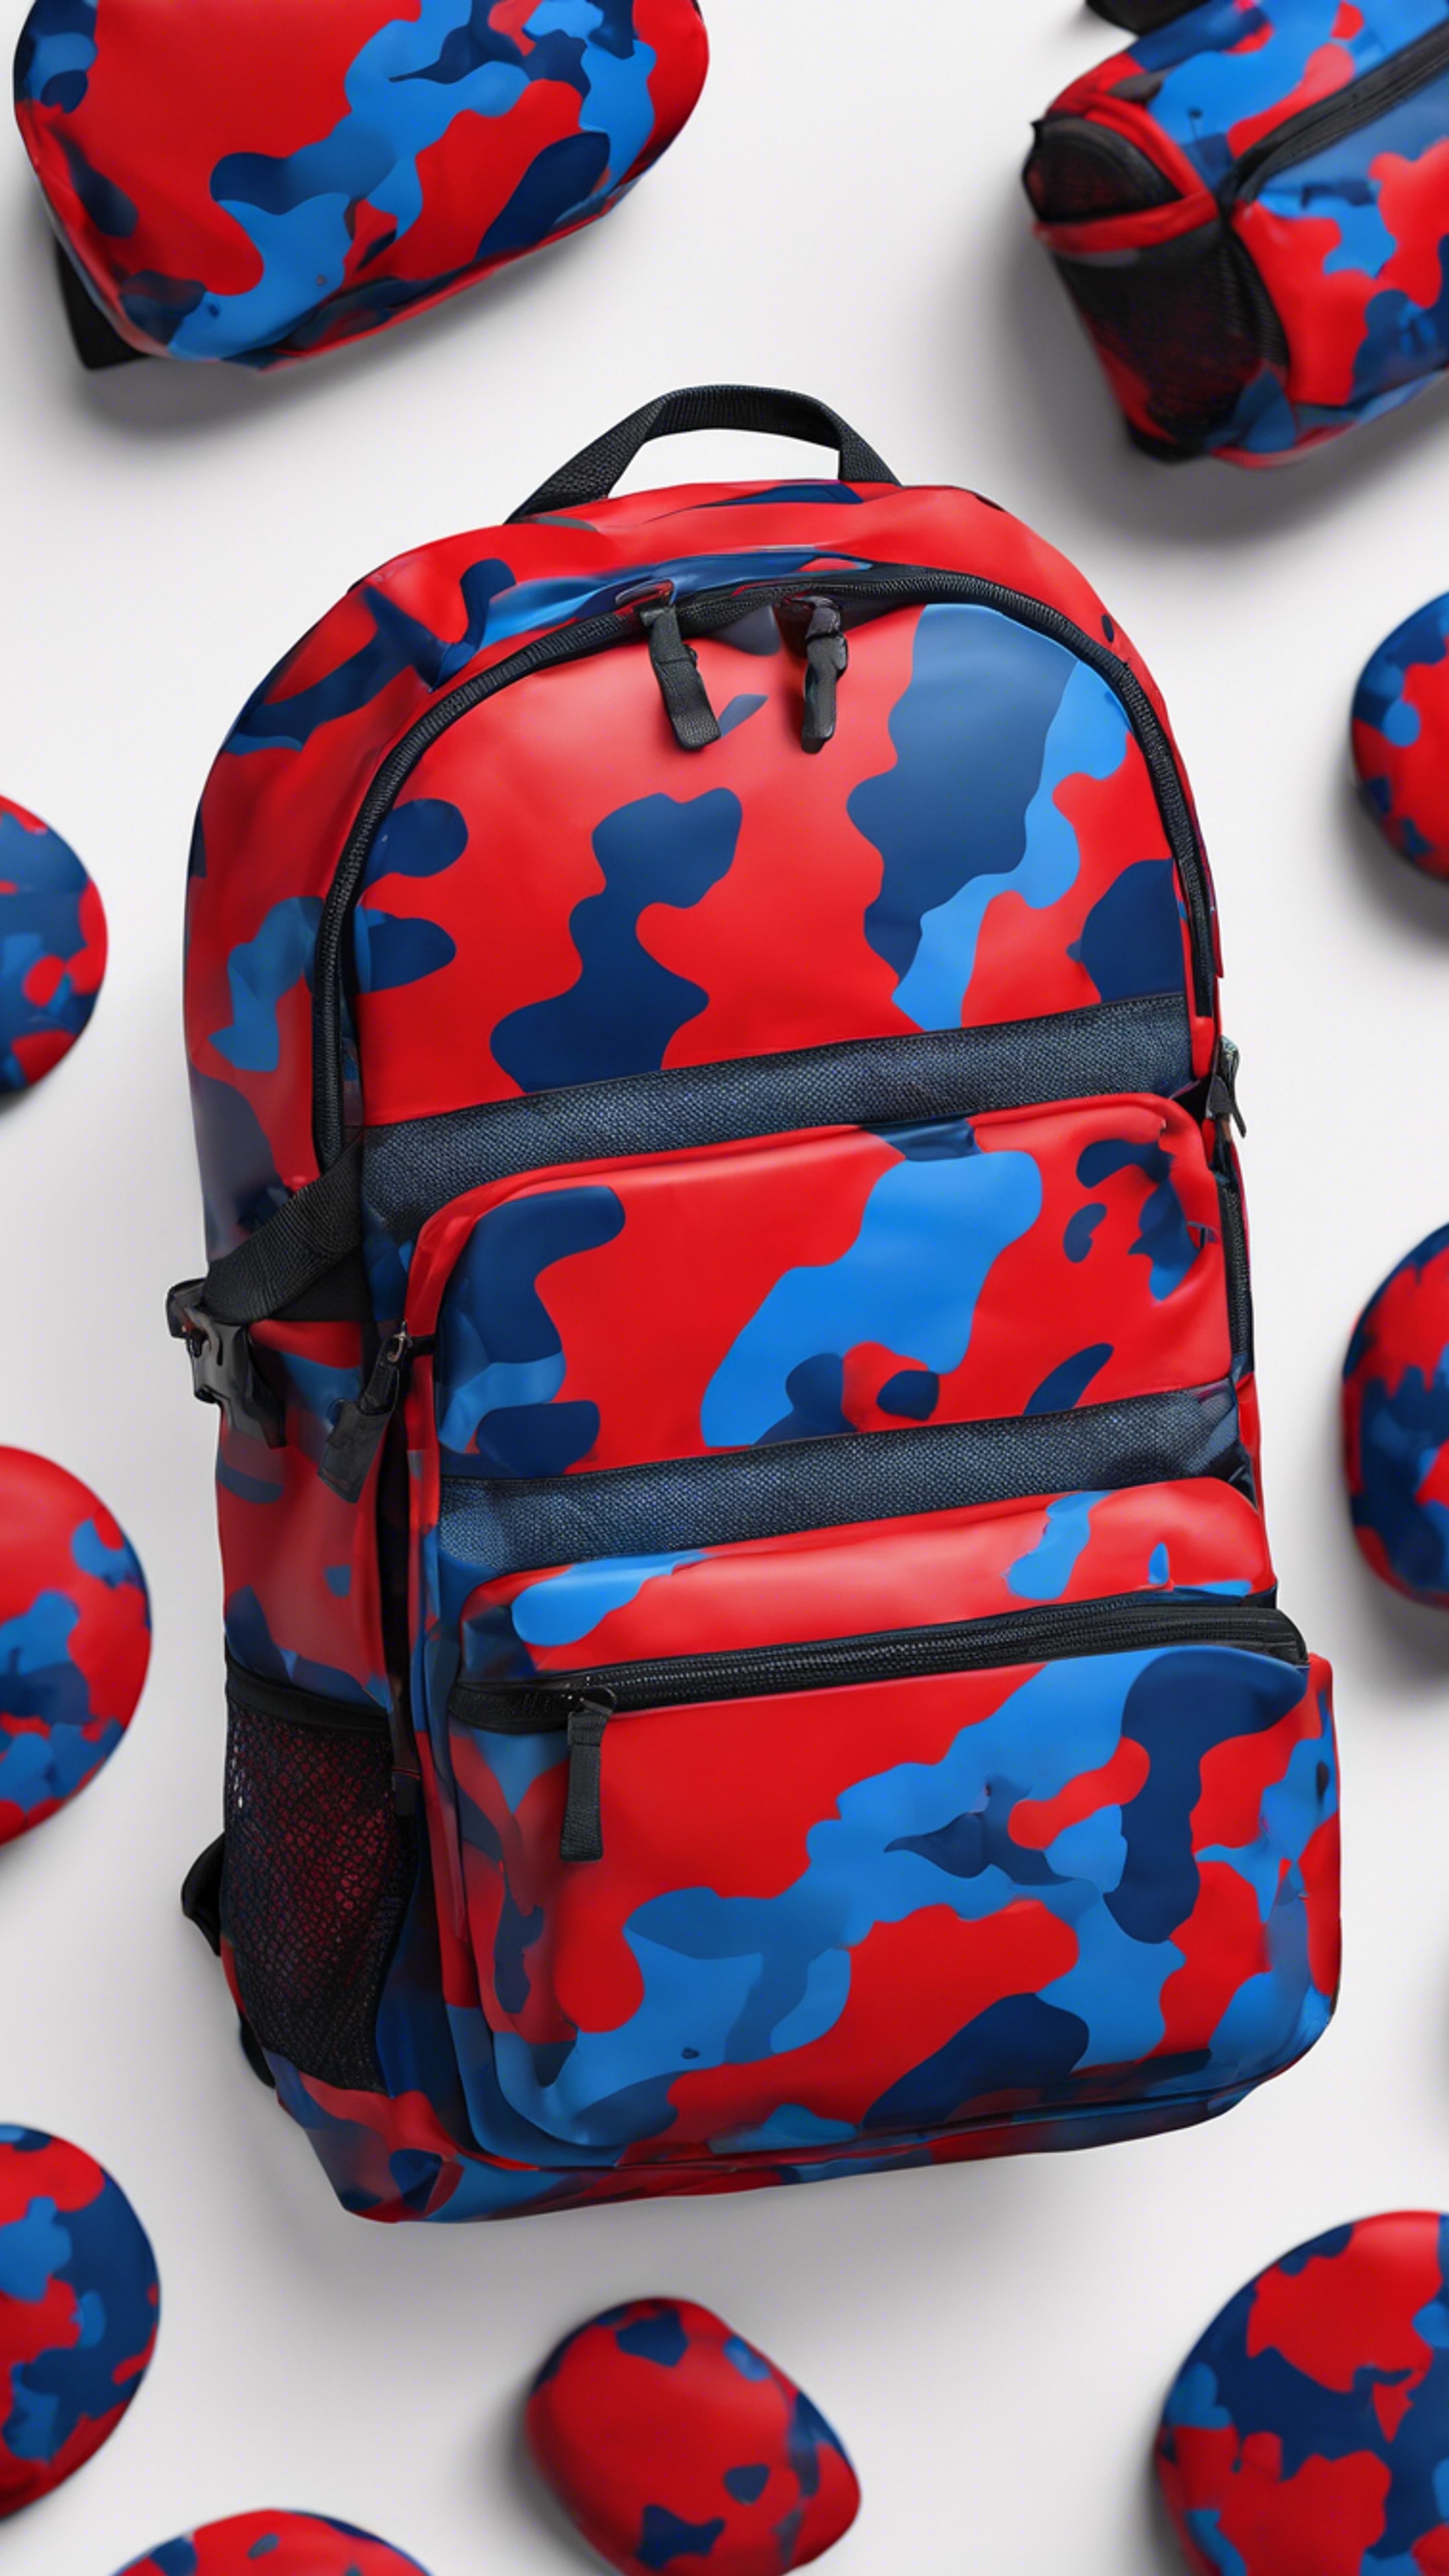 A seamless pattern of red and blue camouflage like on a sports backpack. Behang[ebf2c58b20f943e08eab]